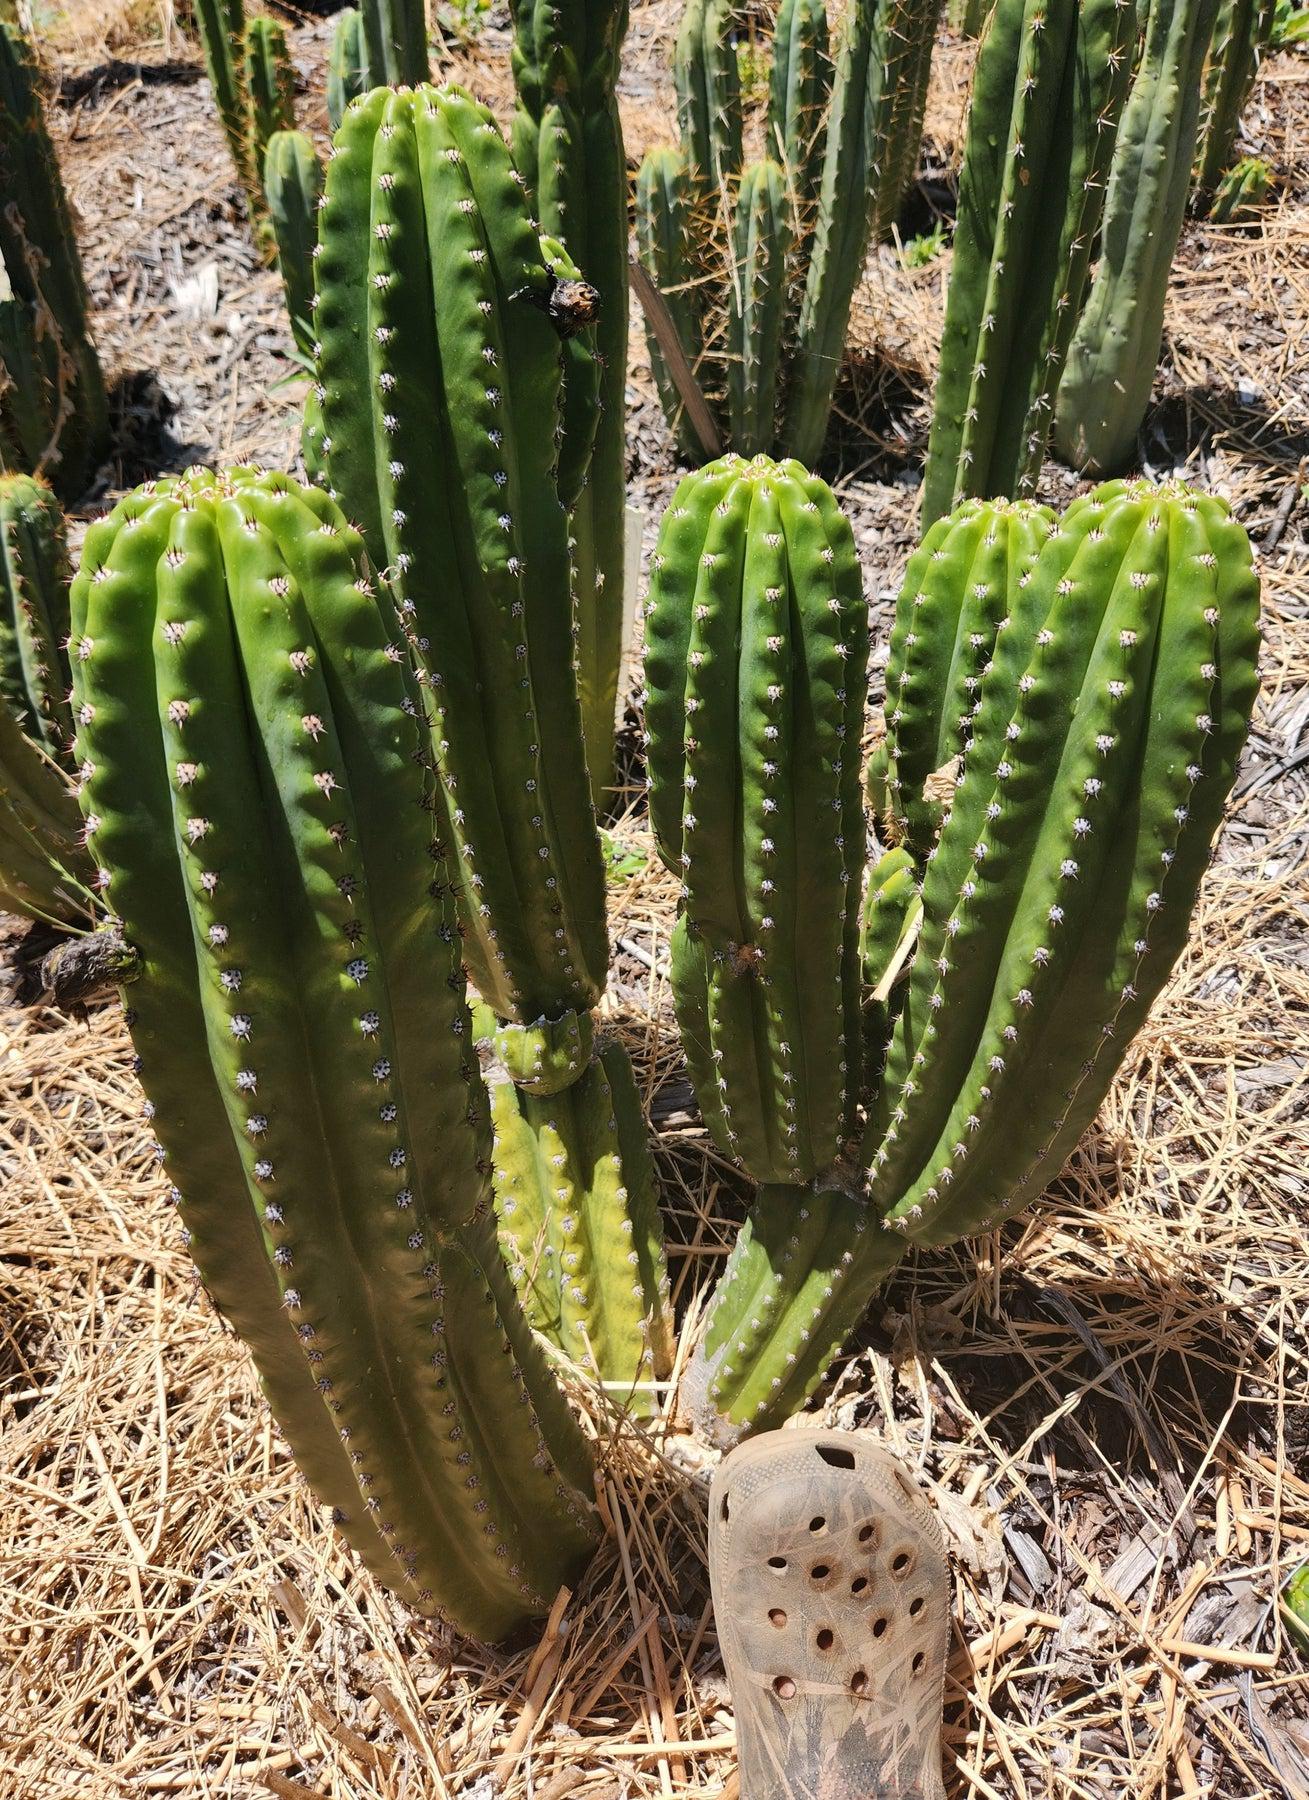 Fake Flowers on Cacti – What a Con. Buyer BEWARE!!! – Piglet in